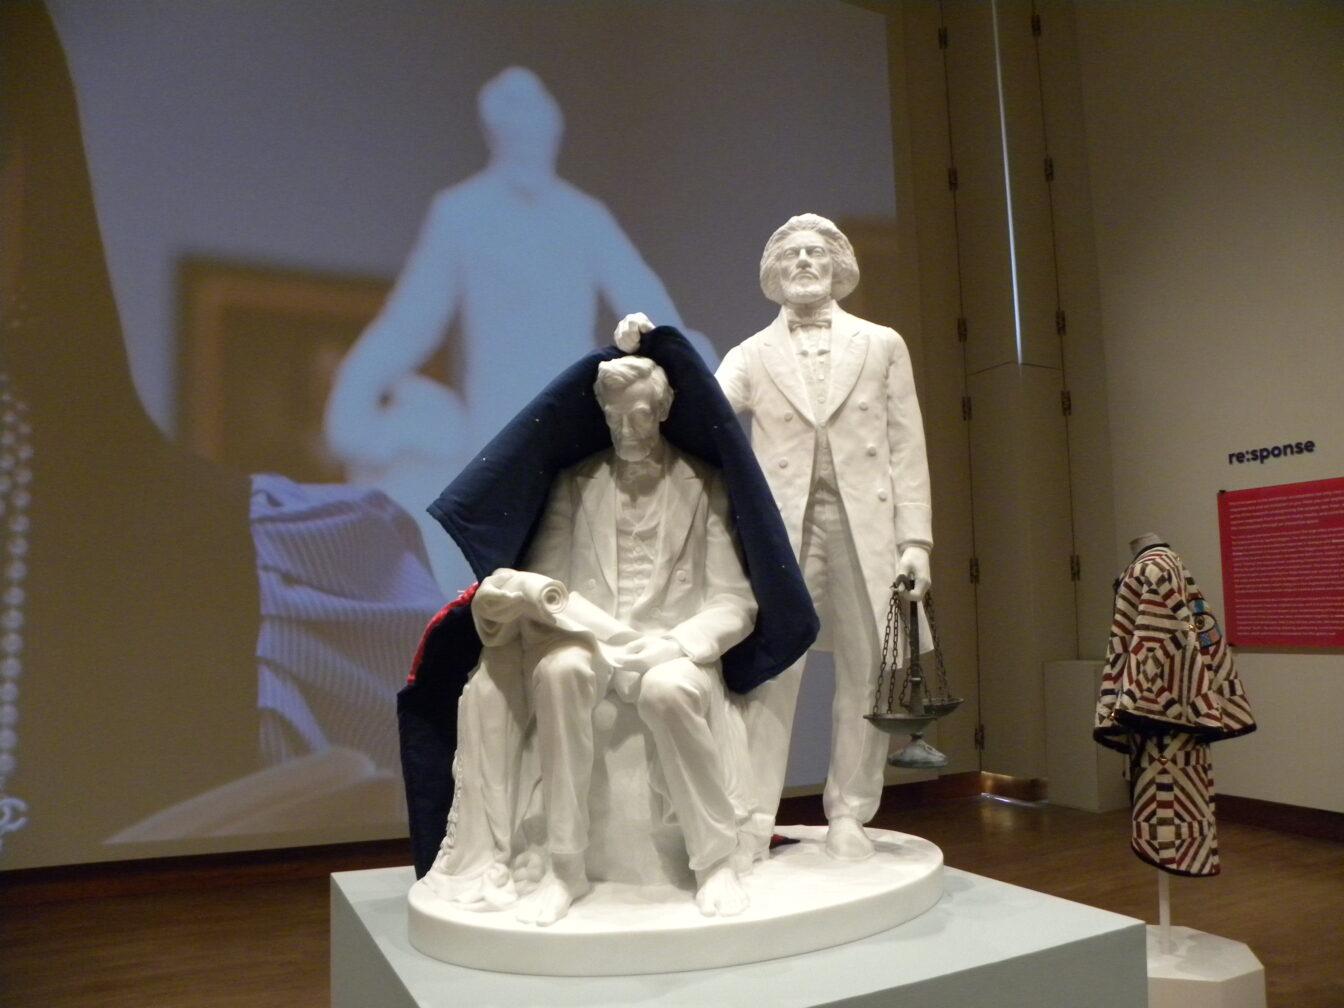 Sanford Biggers response piece to Emancipation Group flips the script by featuring Frederick Douglass as the presiding figure over Abraham Lincoln